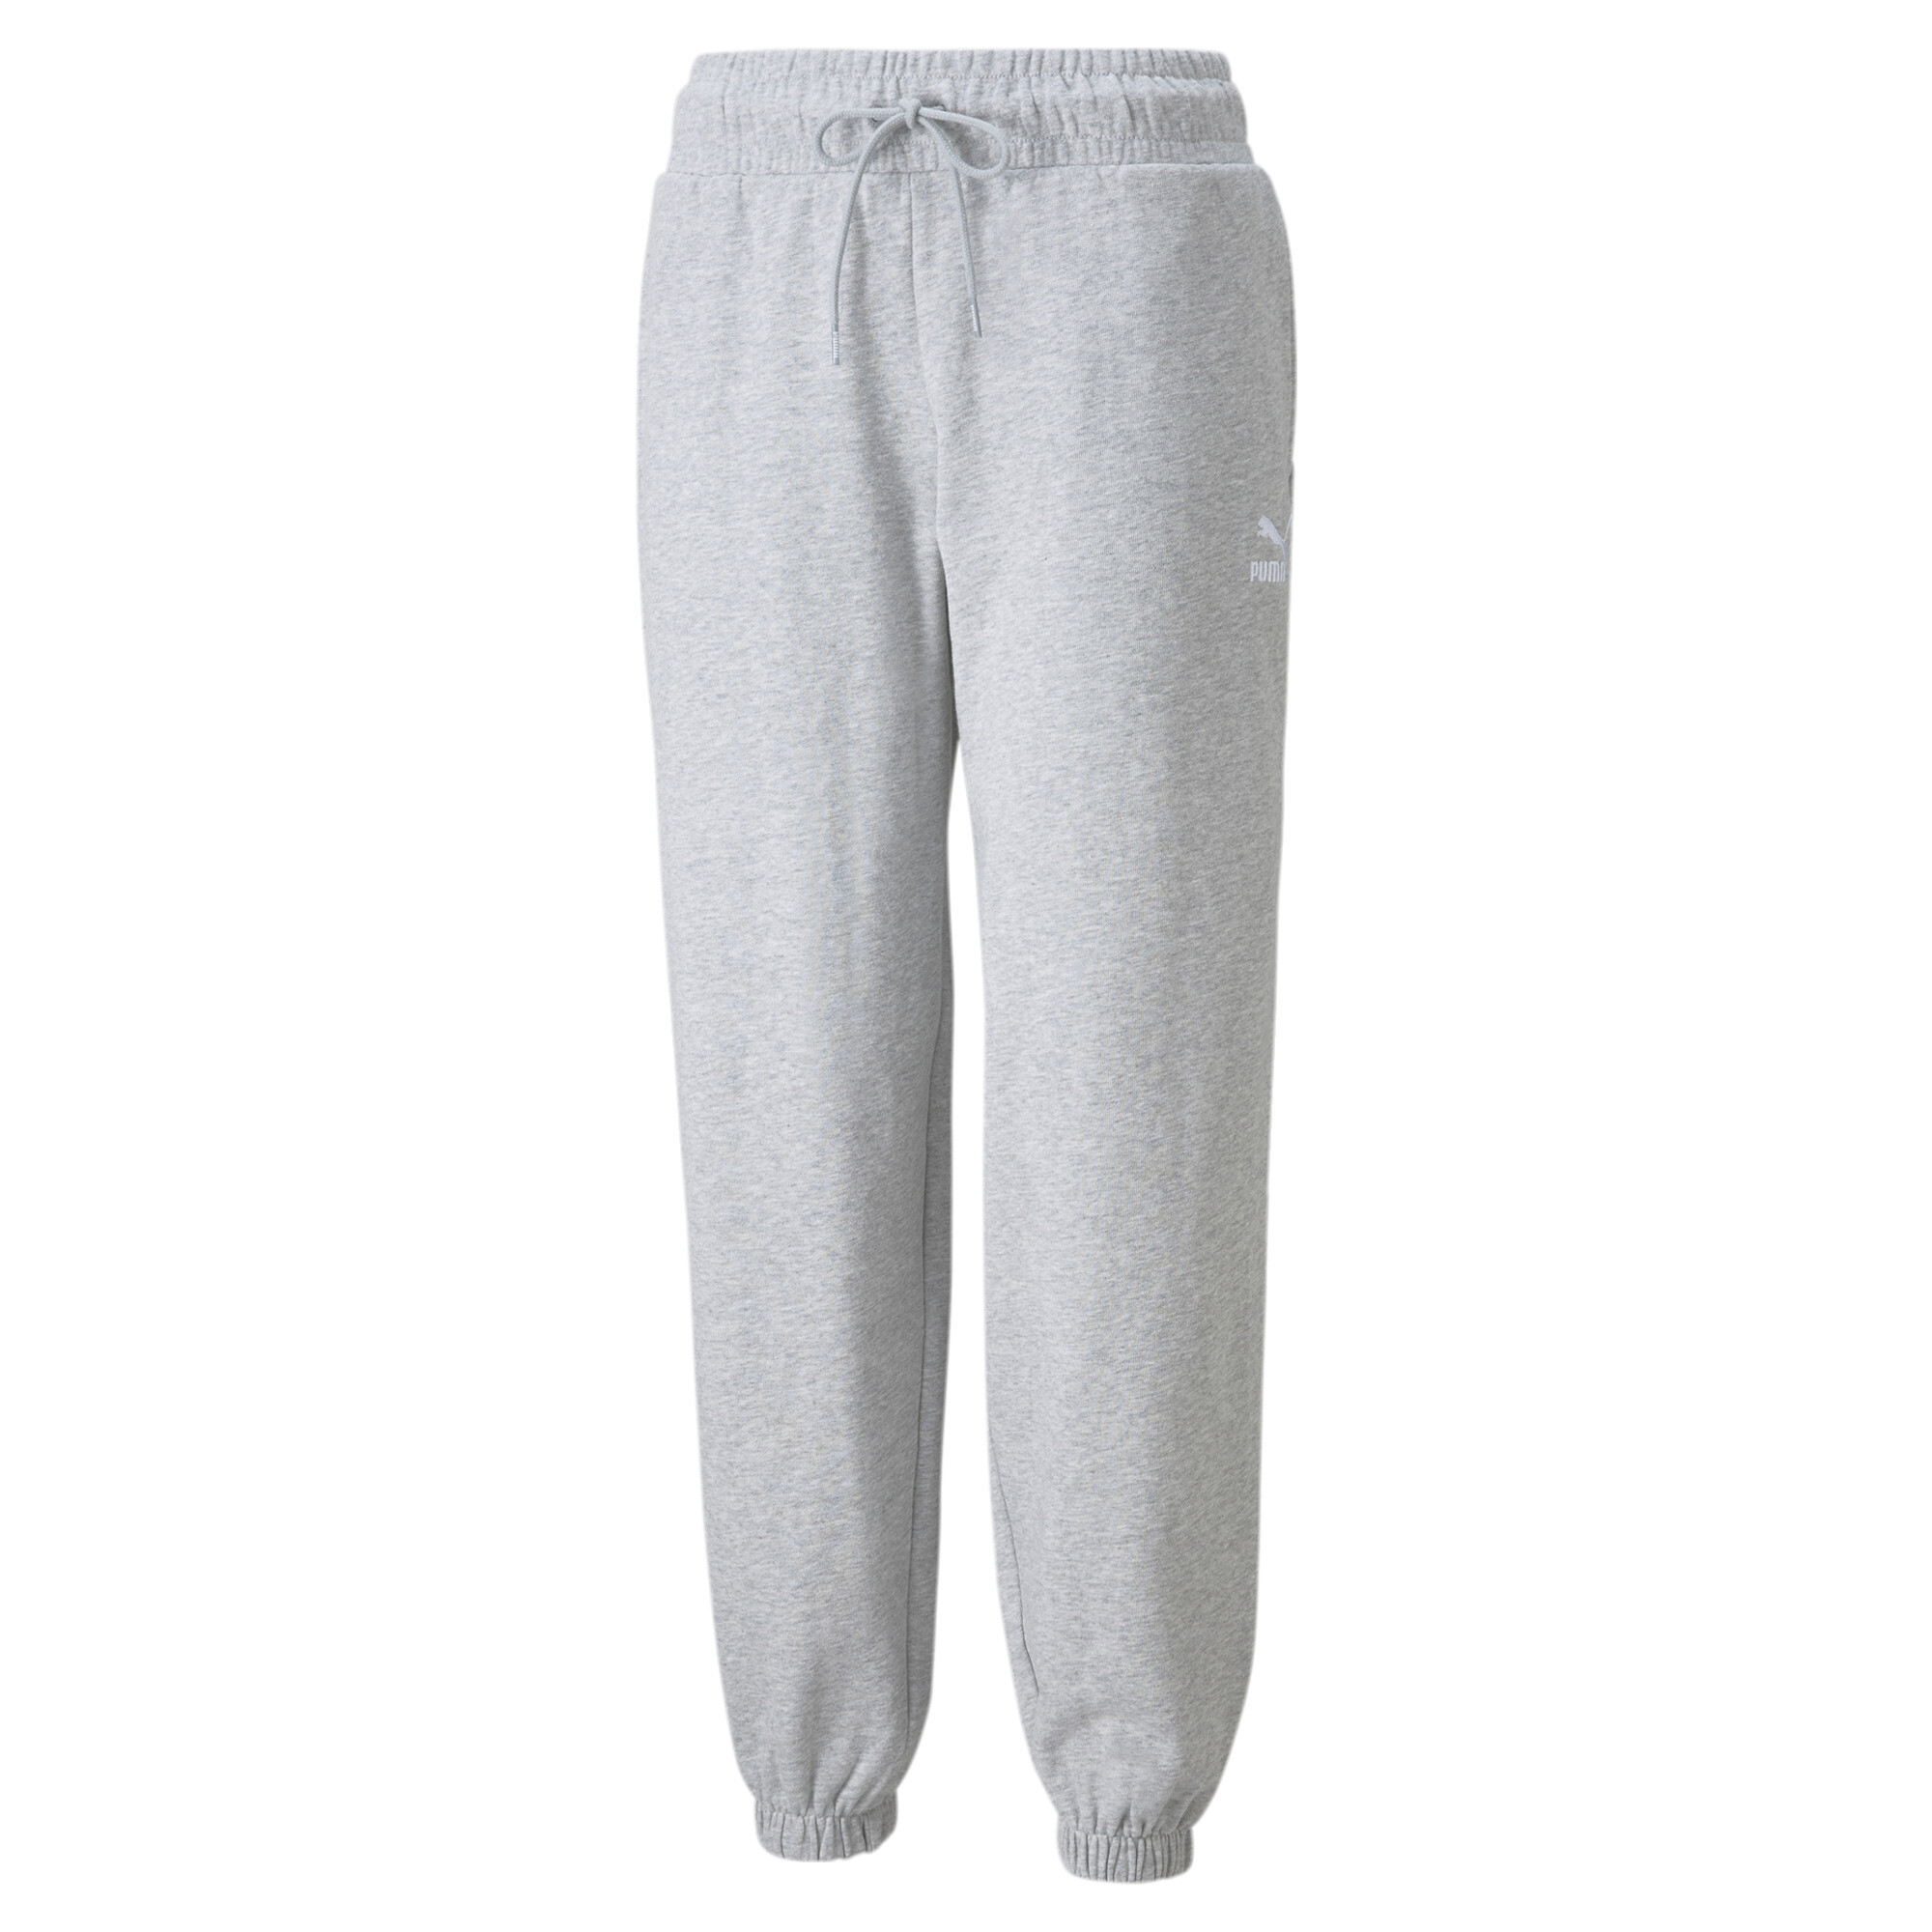 Women's Puma Classics PLUS Relaxed's Joggers, Gray, Size 3X, Clothing